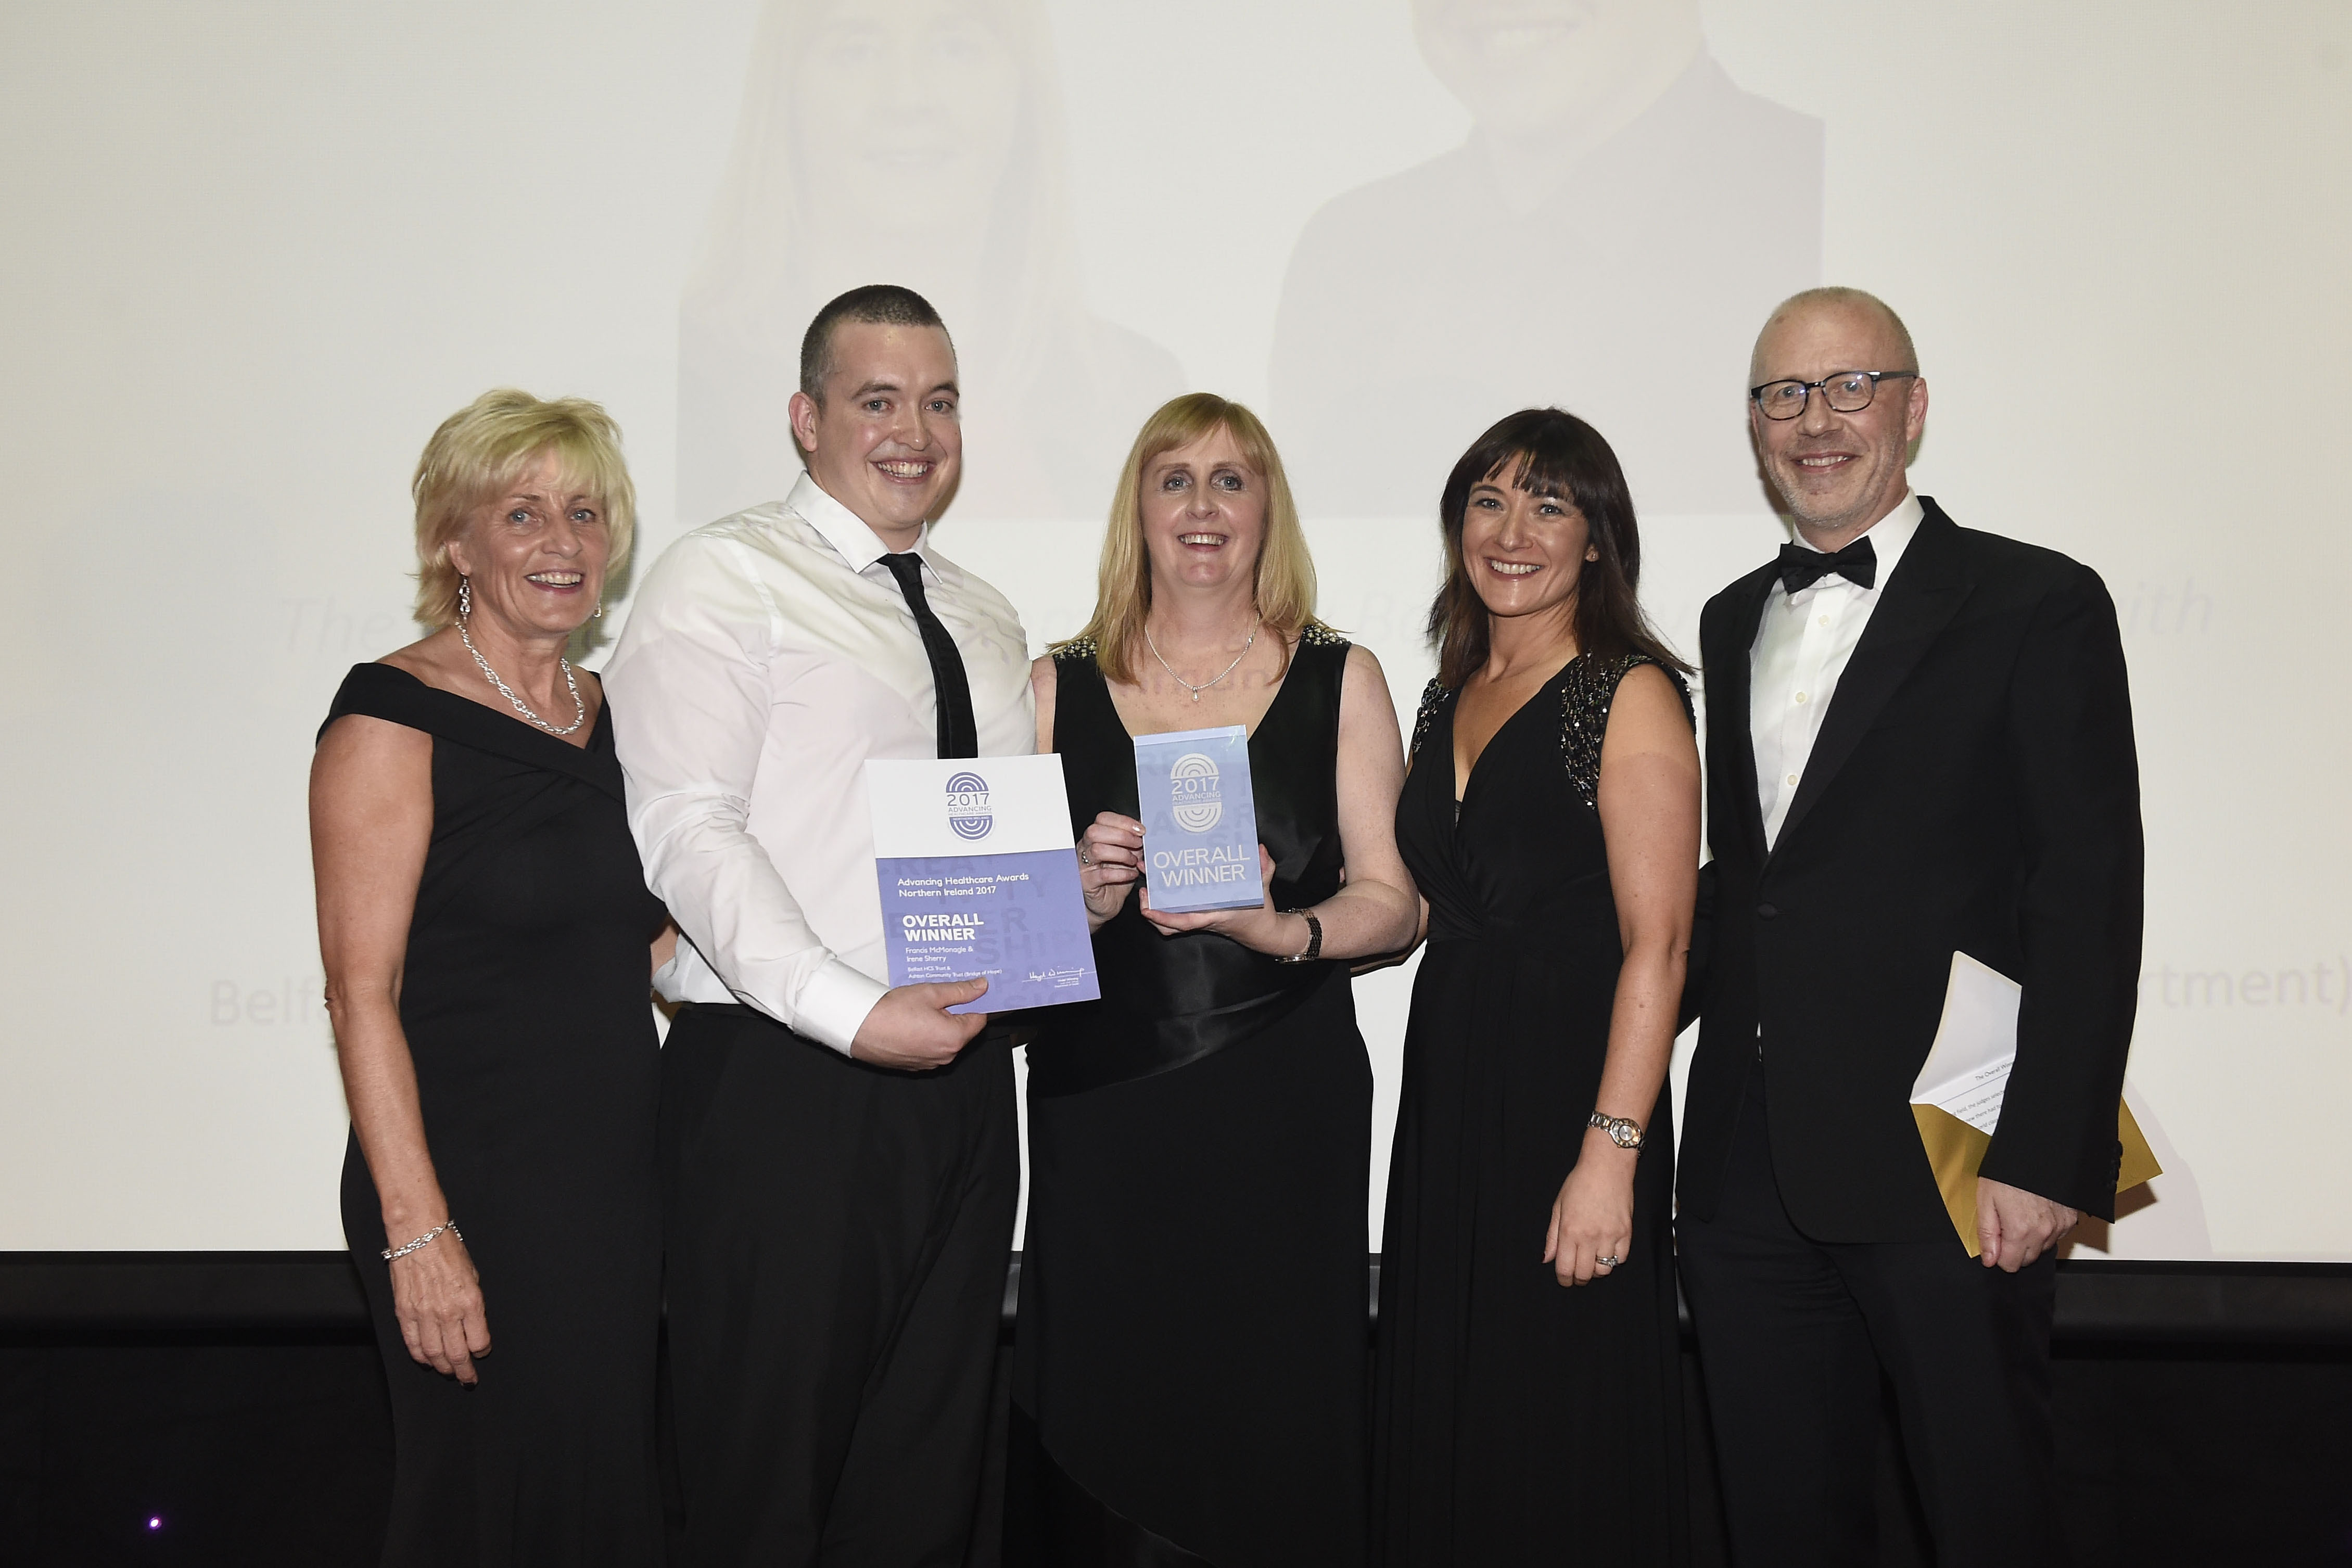 Left to right: AHP lead officer Hazel Winning, specialist MSK physio Francis McMonagle, Irene Sherry, Head of Victims & Mental Health Services at Bridge of Hope, Awards host Jo Scott and Ian Young, Chief Scientific Advisor at the Department of Health. Photo: Michael Cooper